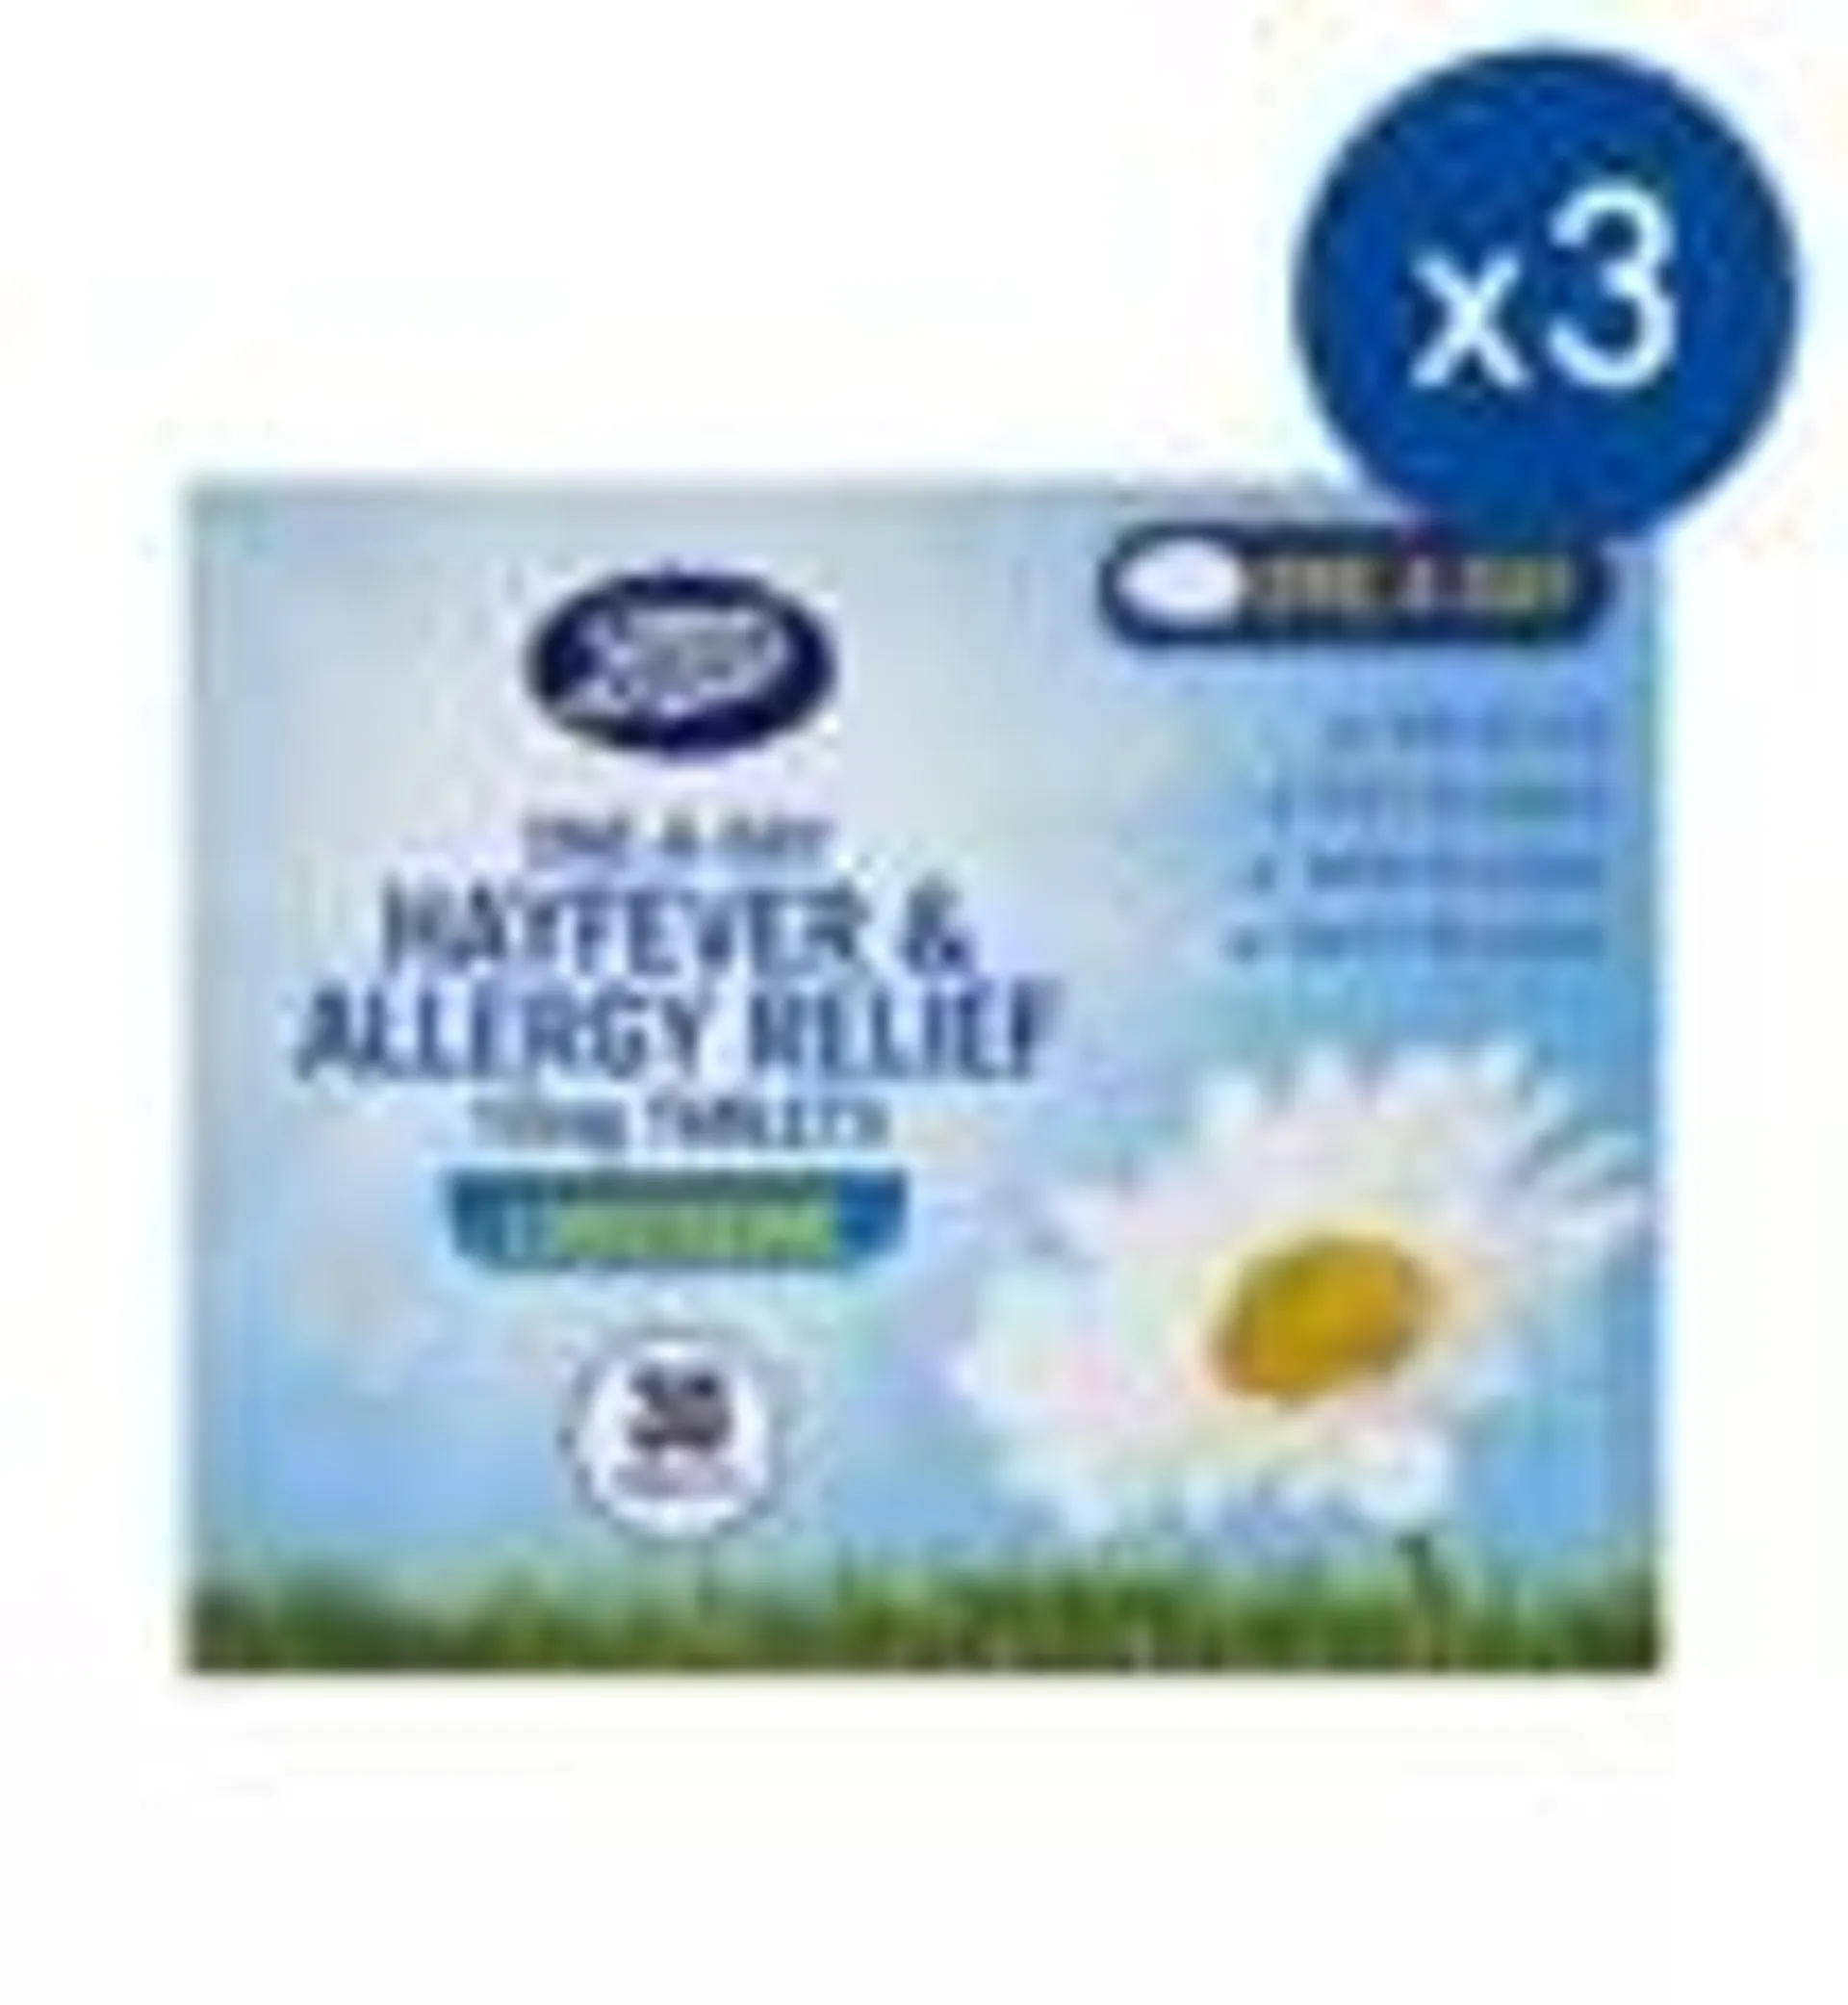 Boots One-a-Day Hayfever & Allergy Relief 10mg Tablets - 30 Tablets